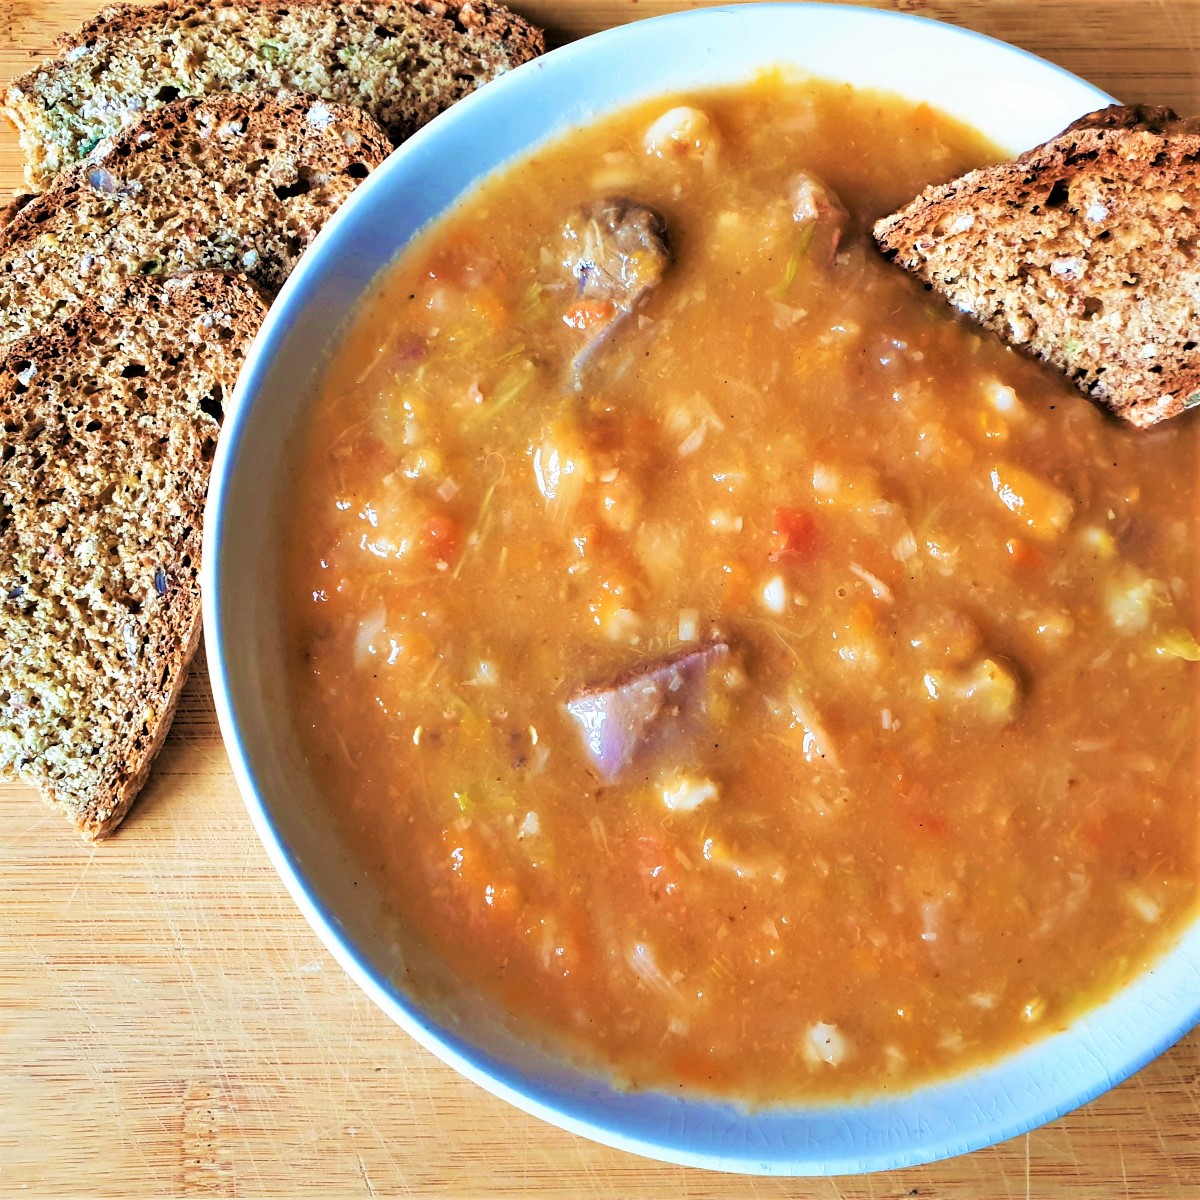 A bowl of beef vegetable soup with slices of bread.